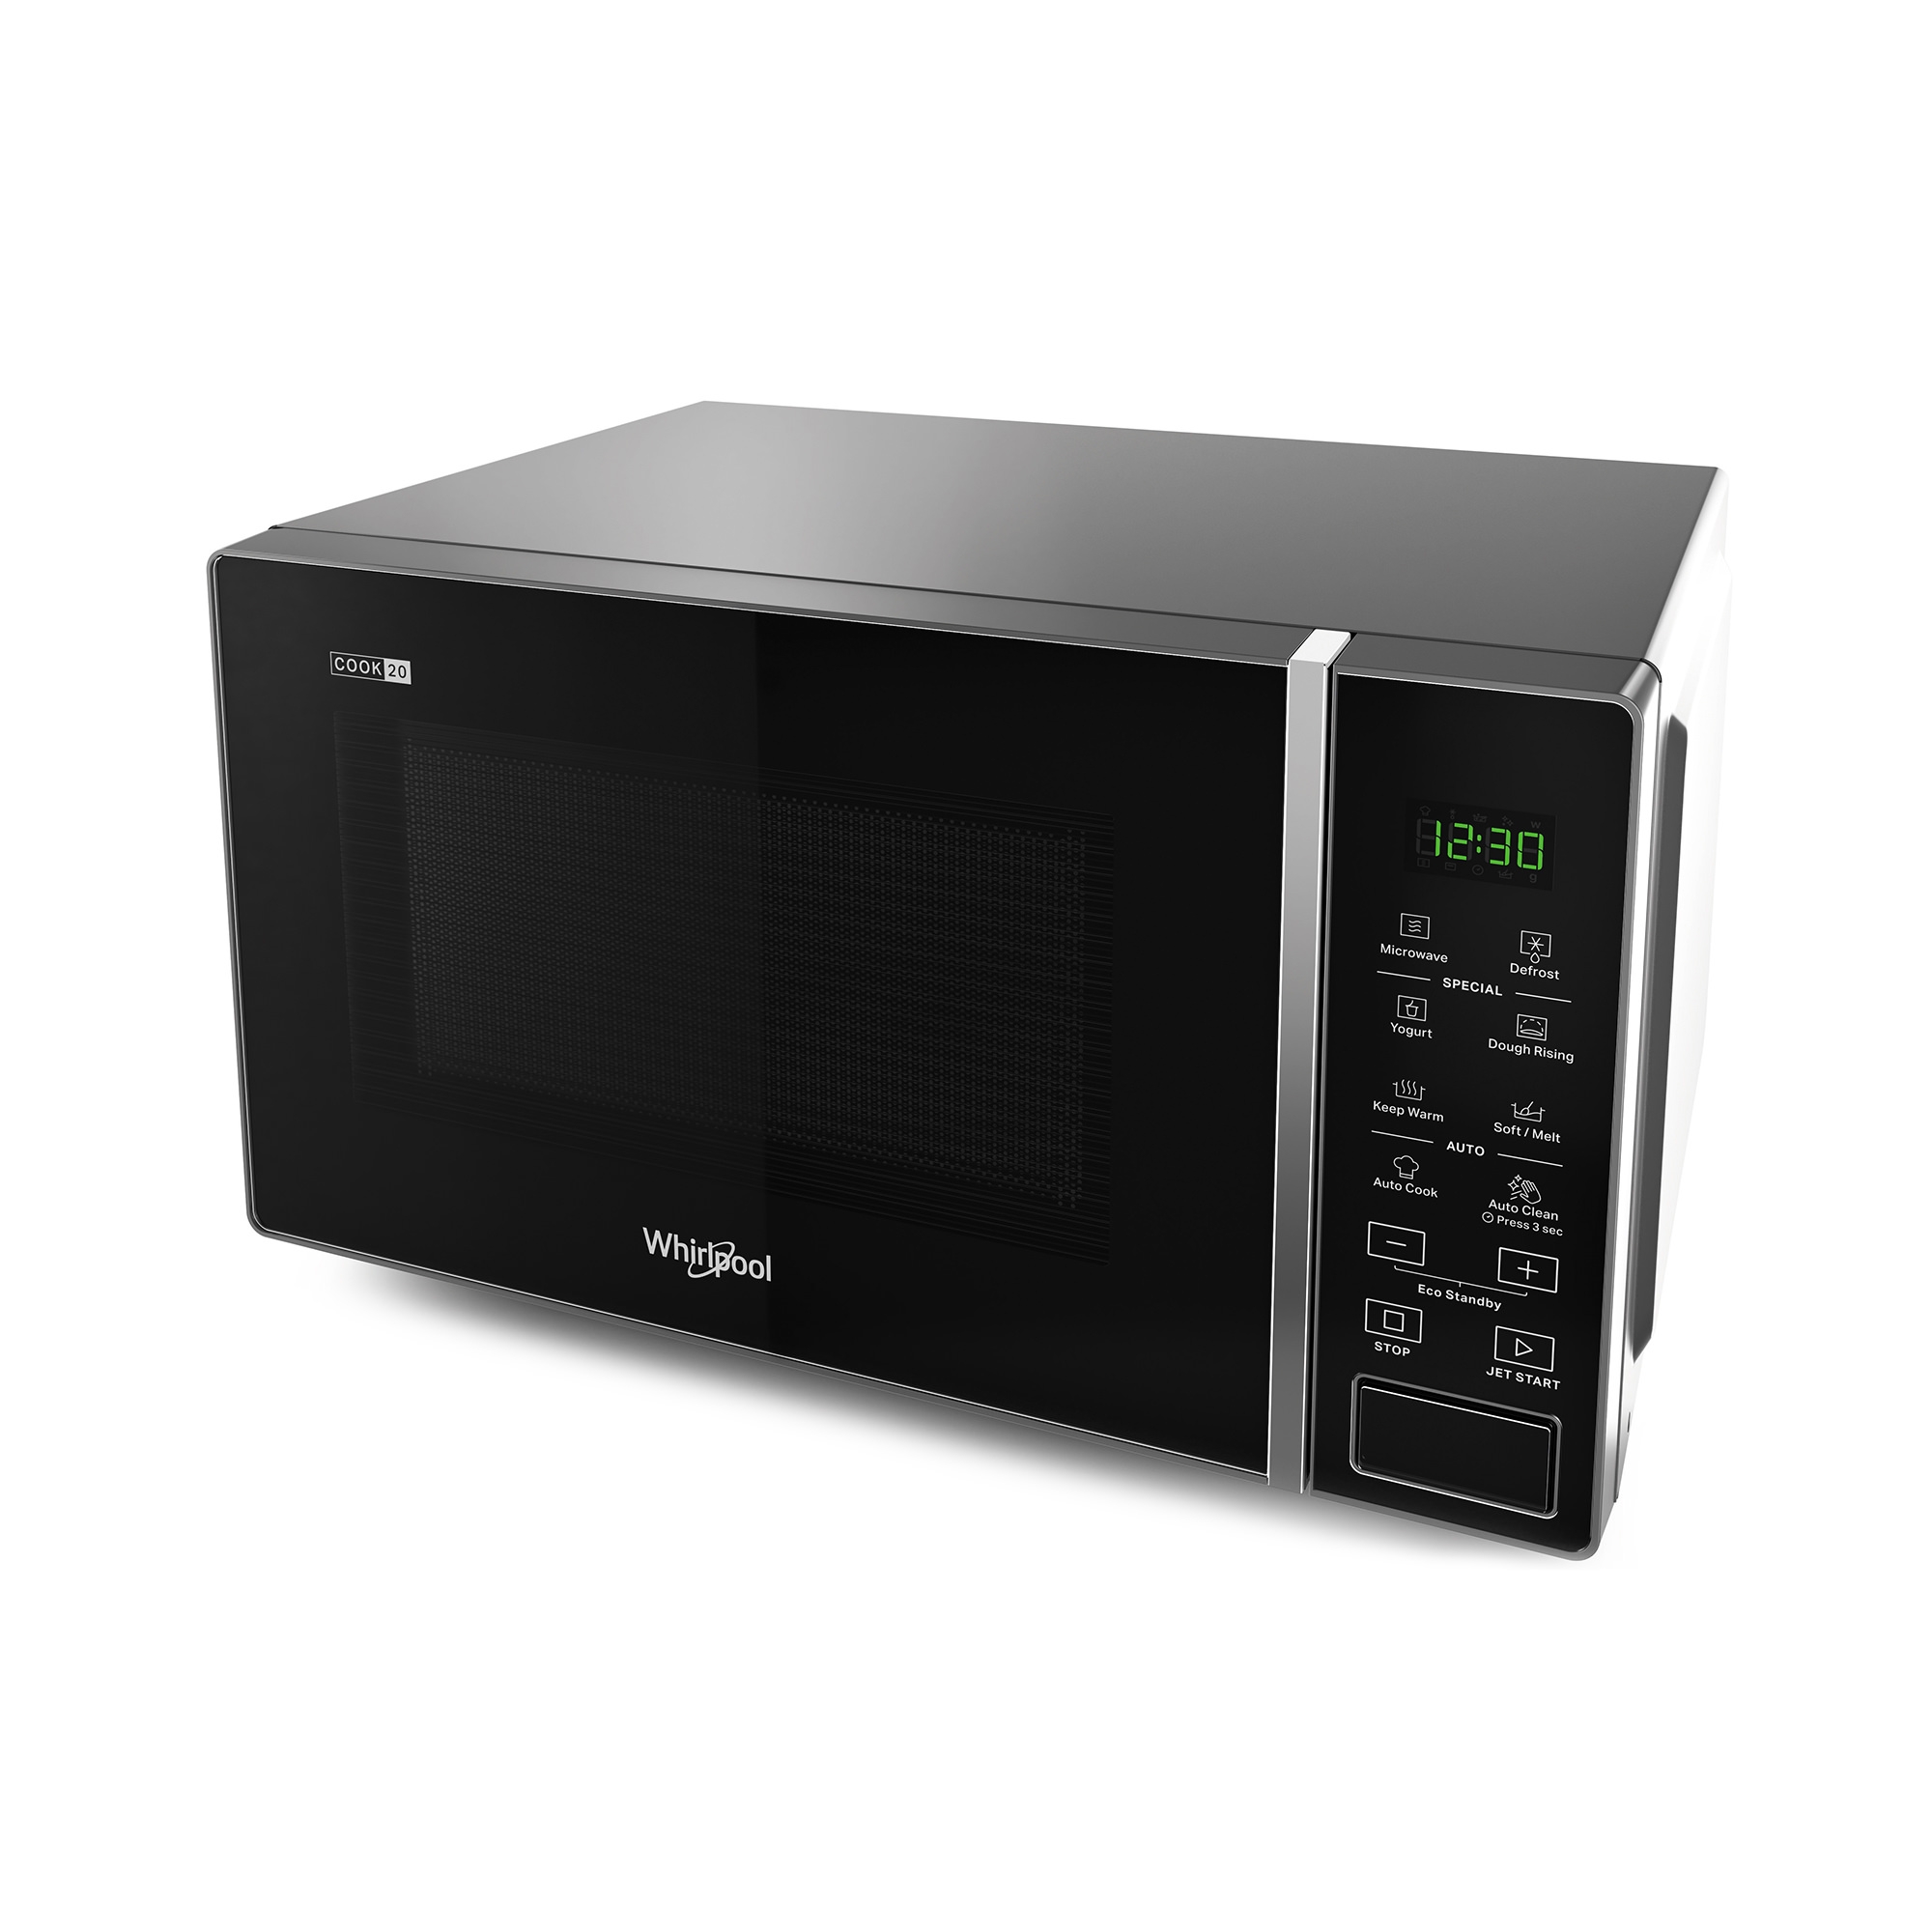 Whirlpool Microwave Oven 20L Black Image 2